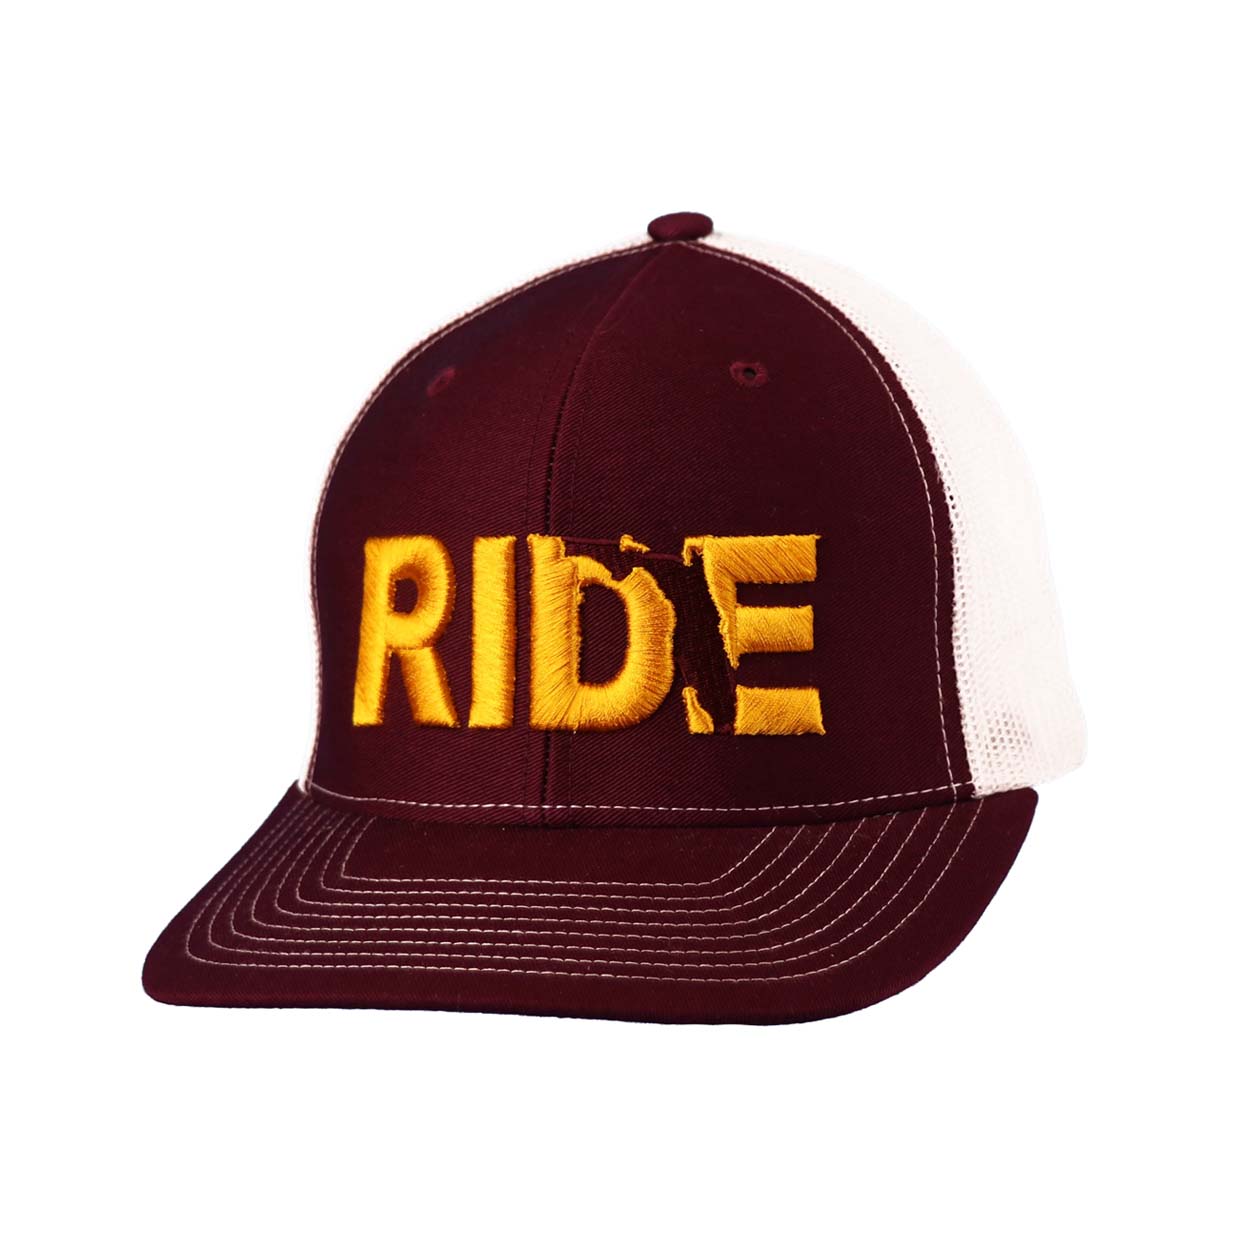 Ride Florida Classic Embroidered Snapback Trucker Hat Maroon/Gold